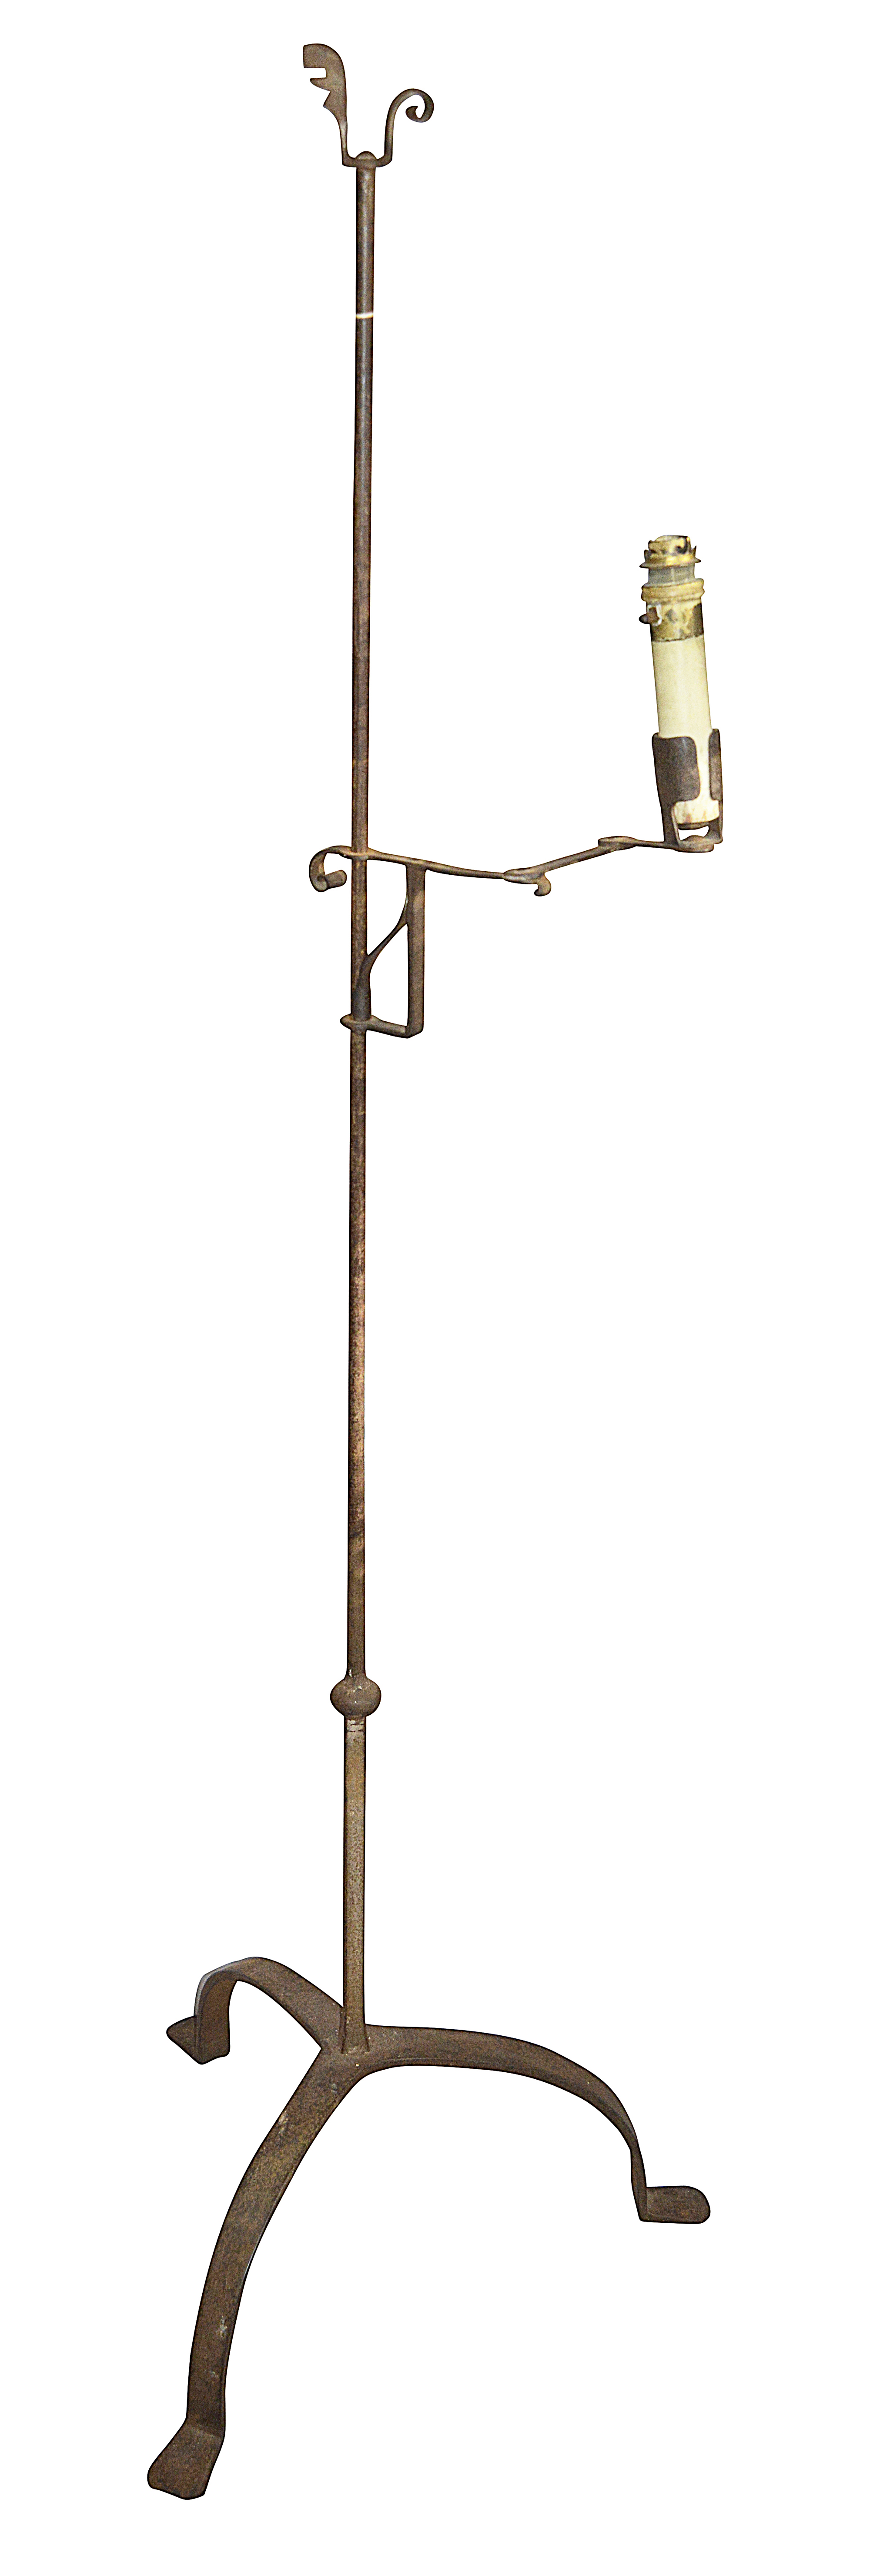 An early 18th century wrought iron standing floor candle holder